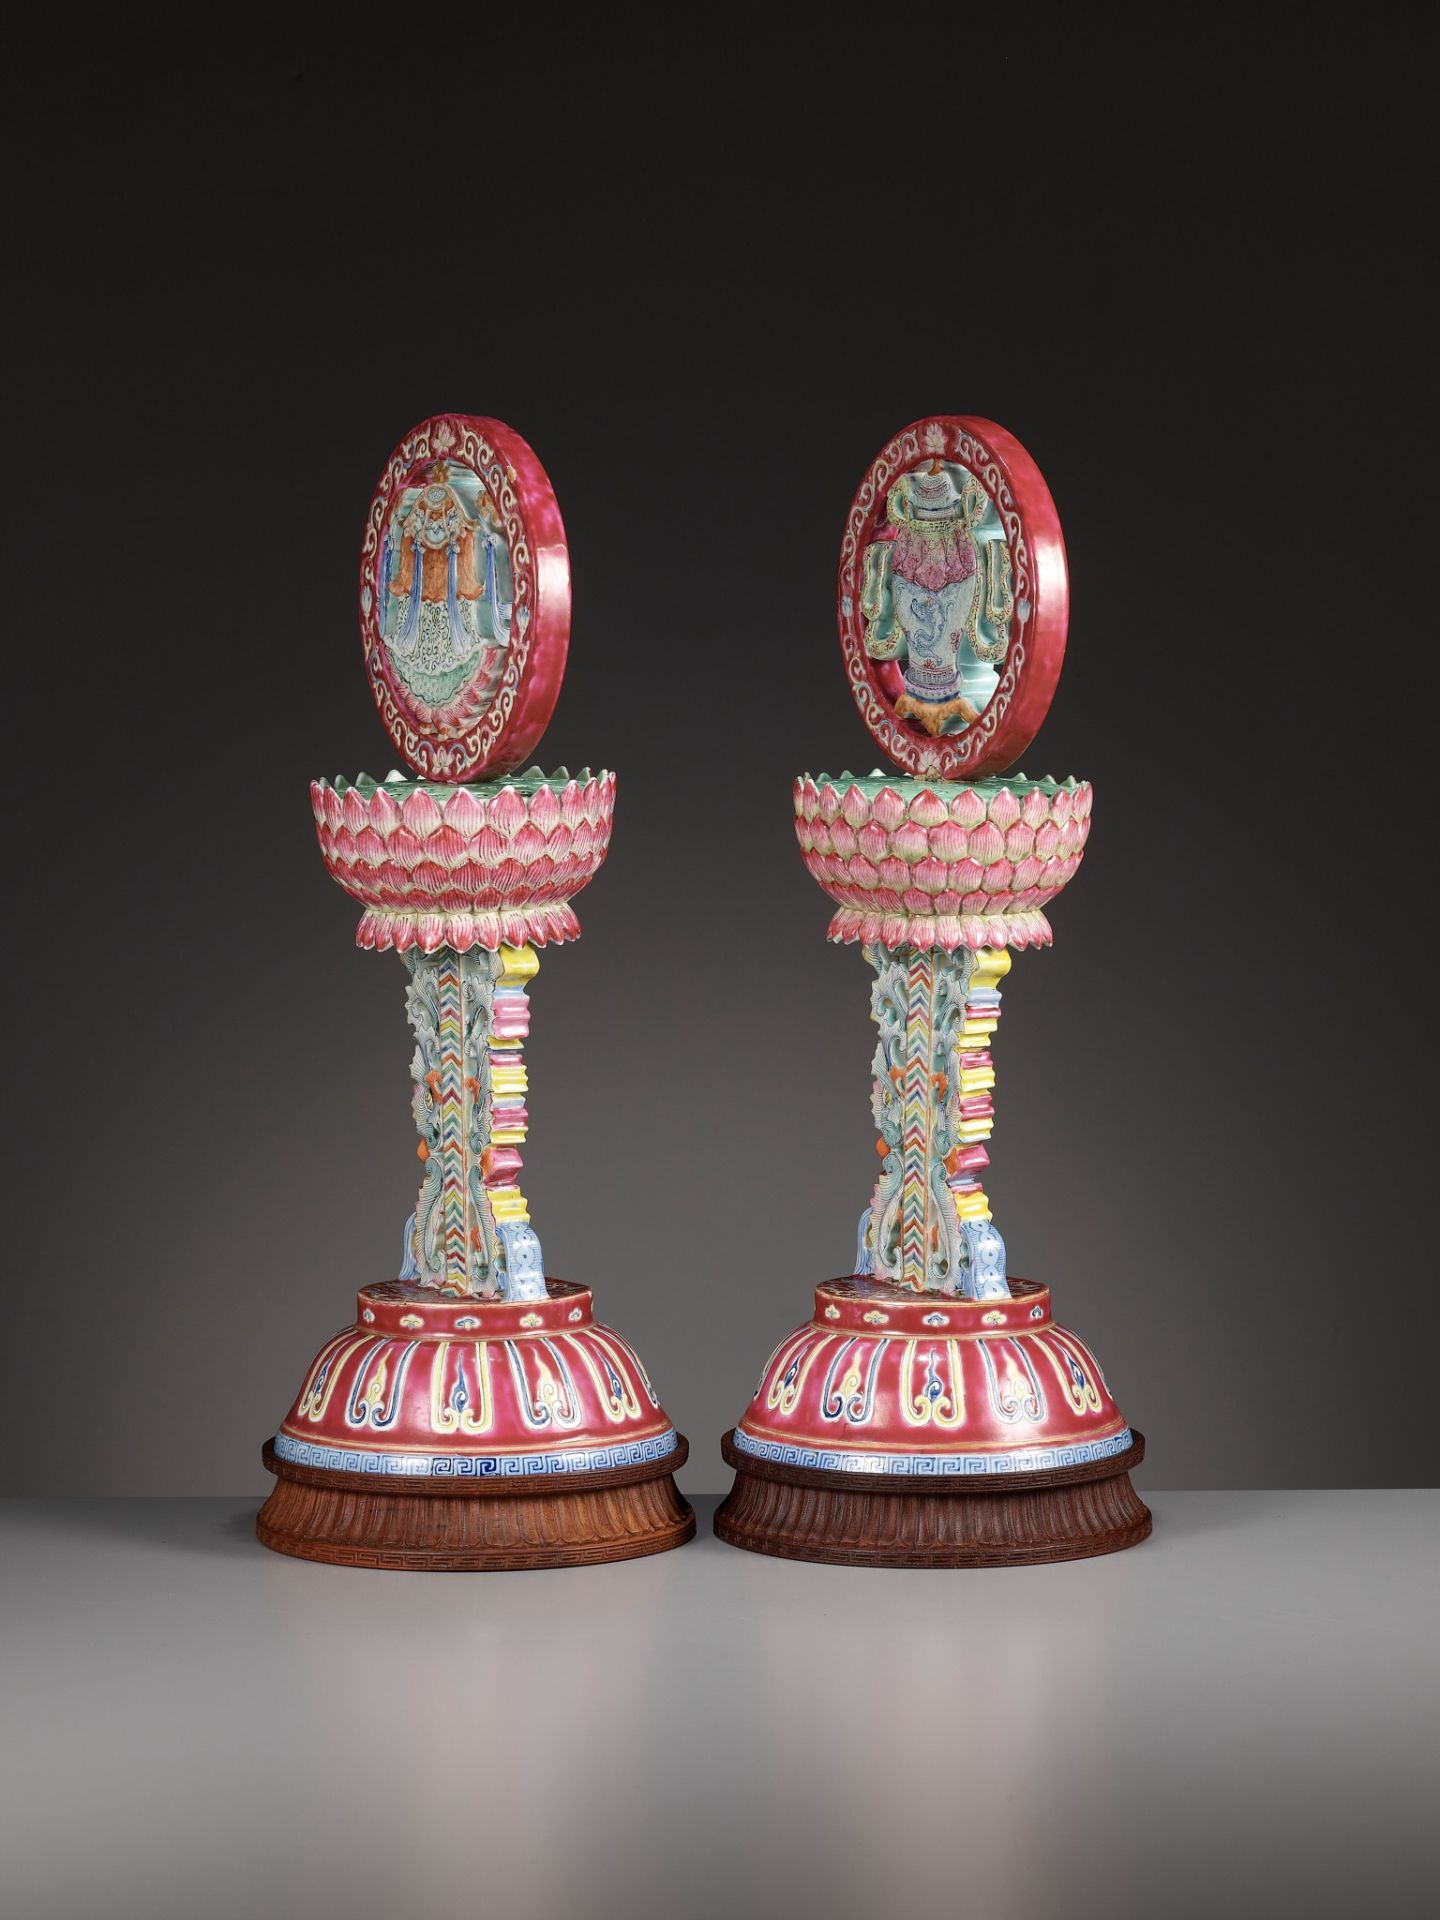 A PAIR OF LARGE RUBY-GROUND FAMILLE ROSE BUDDHIST EMBLEM ALTAR ORNAMENTS, QING DYNASTY - Image 14 of 17